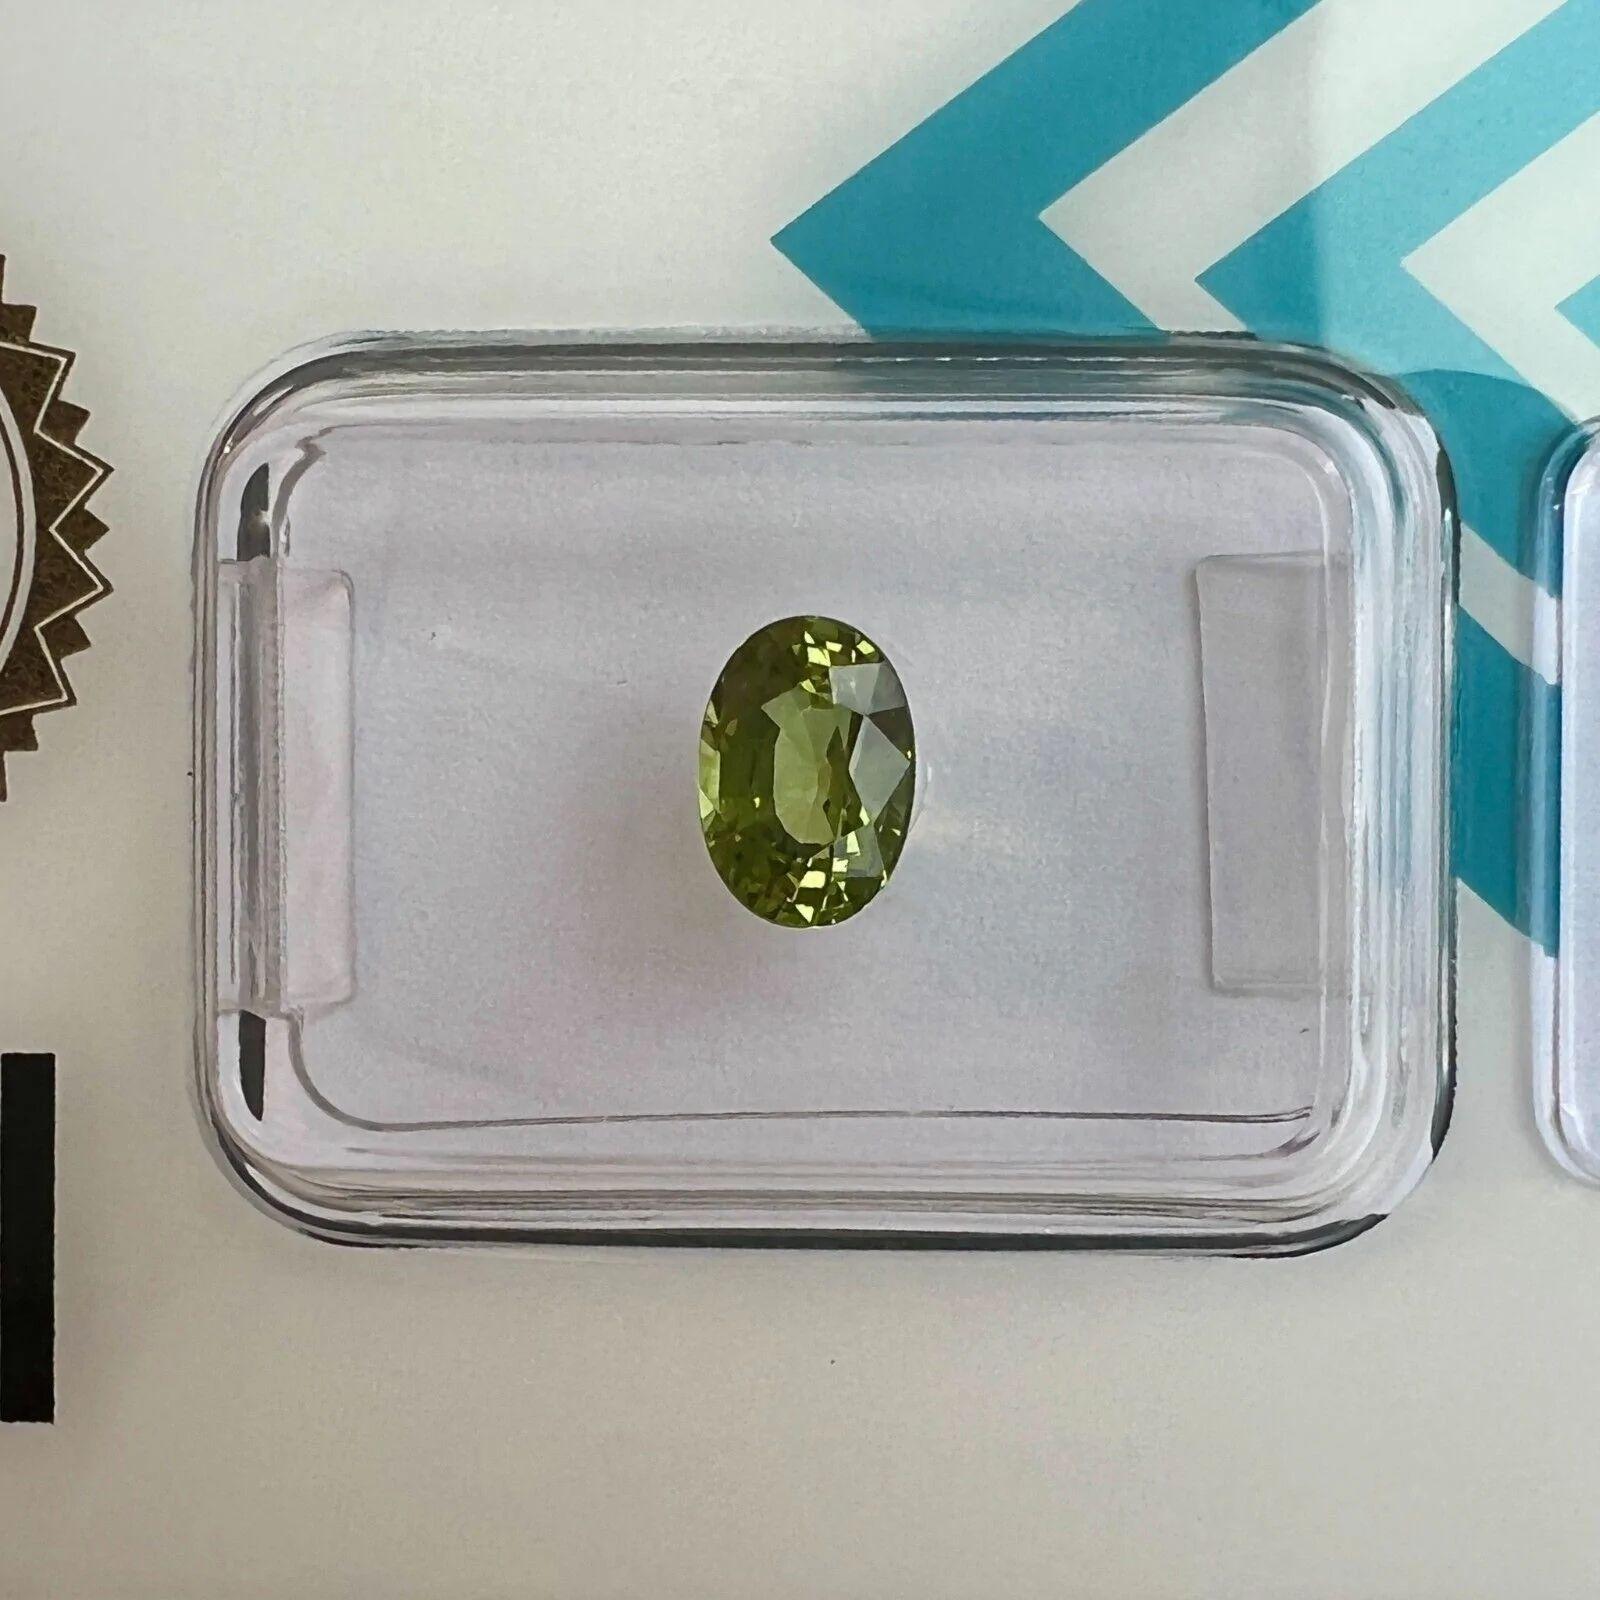 1.05ct Vivid Green Oval Cut Sapphire Untreated Rare IGI Certified Blister

Vivid Green Oval Cut No Heat Sapphire In IGI Blister.
1.05 Carat with a fine vivid green colour, an excellent oval cut and excellent clarity, very clean stone.
Fully